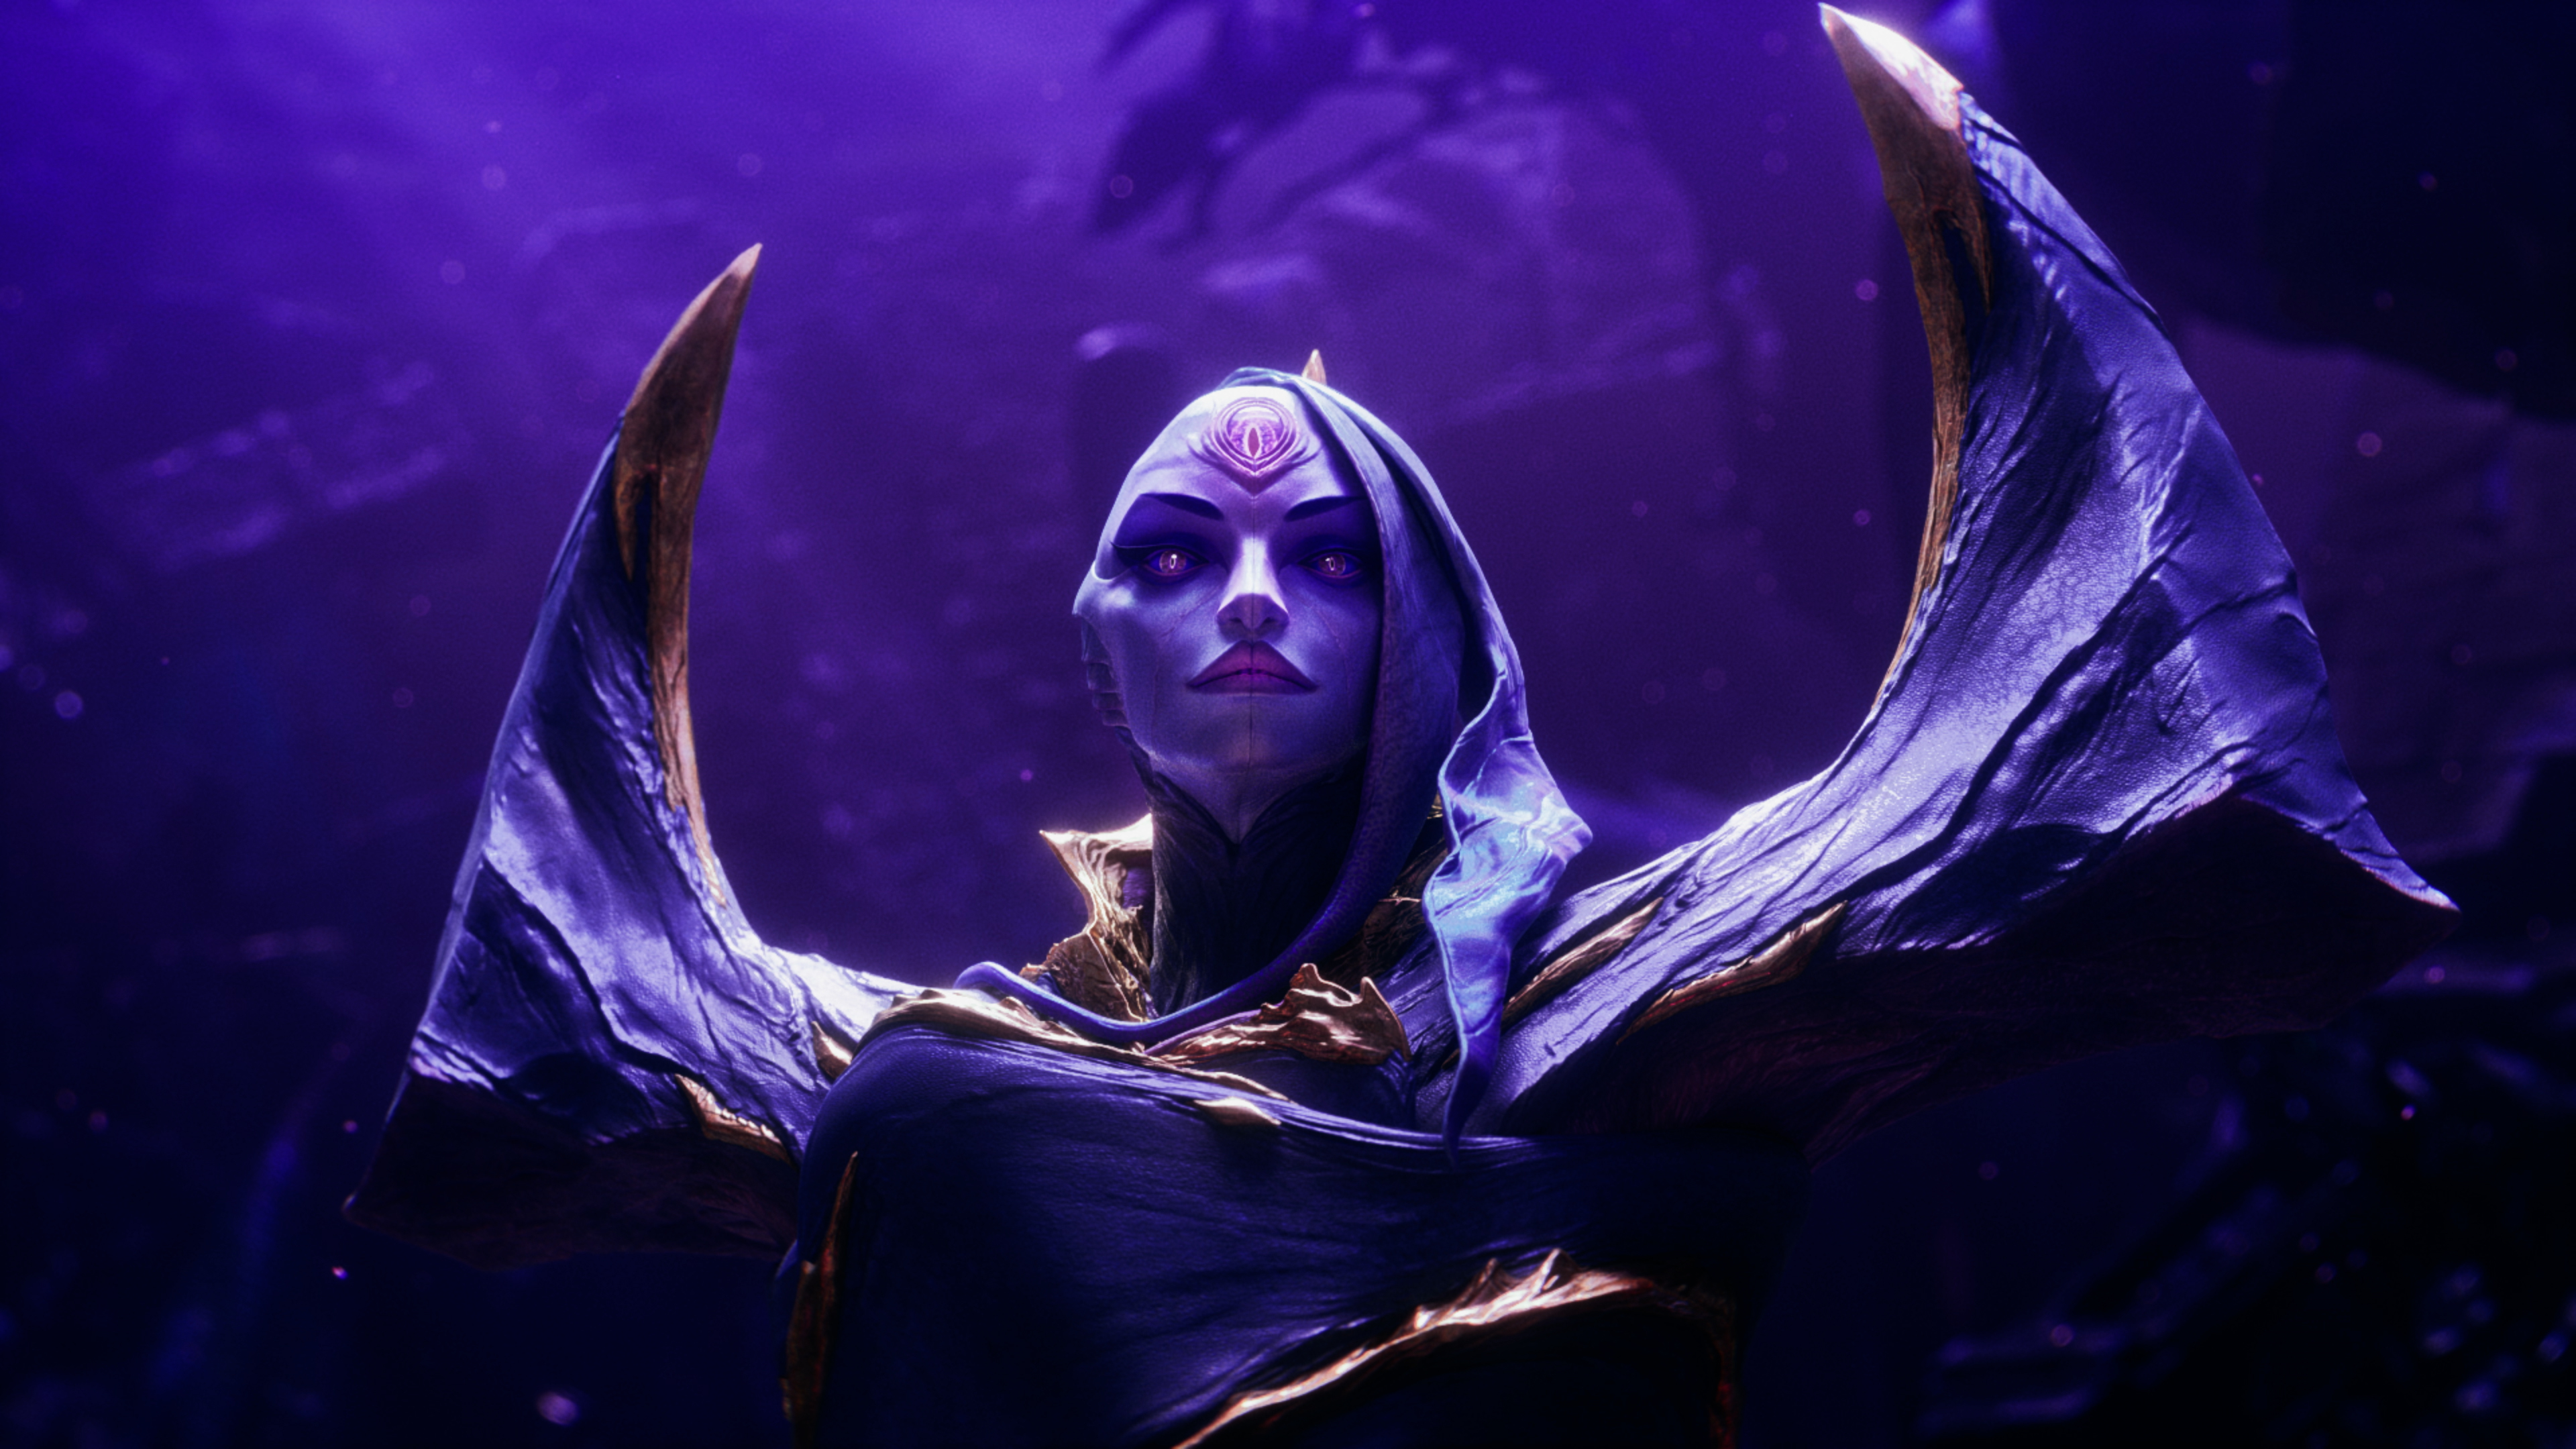 PAX EAST: The Mageseeker: A League Of Legends Story Hands-On Preview:  Another Great Look At LoL Lore